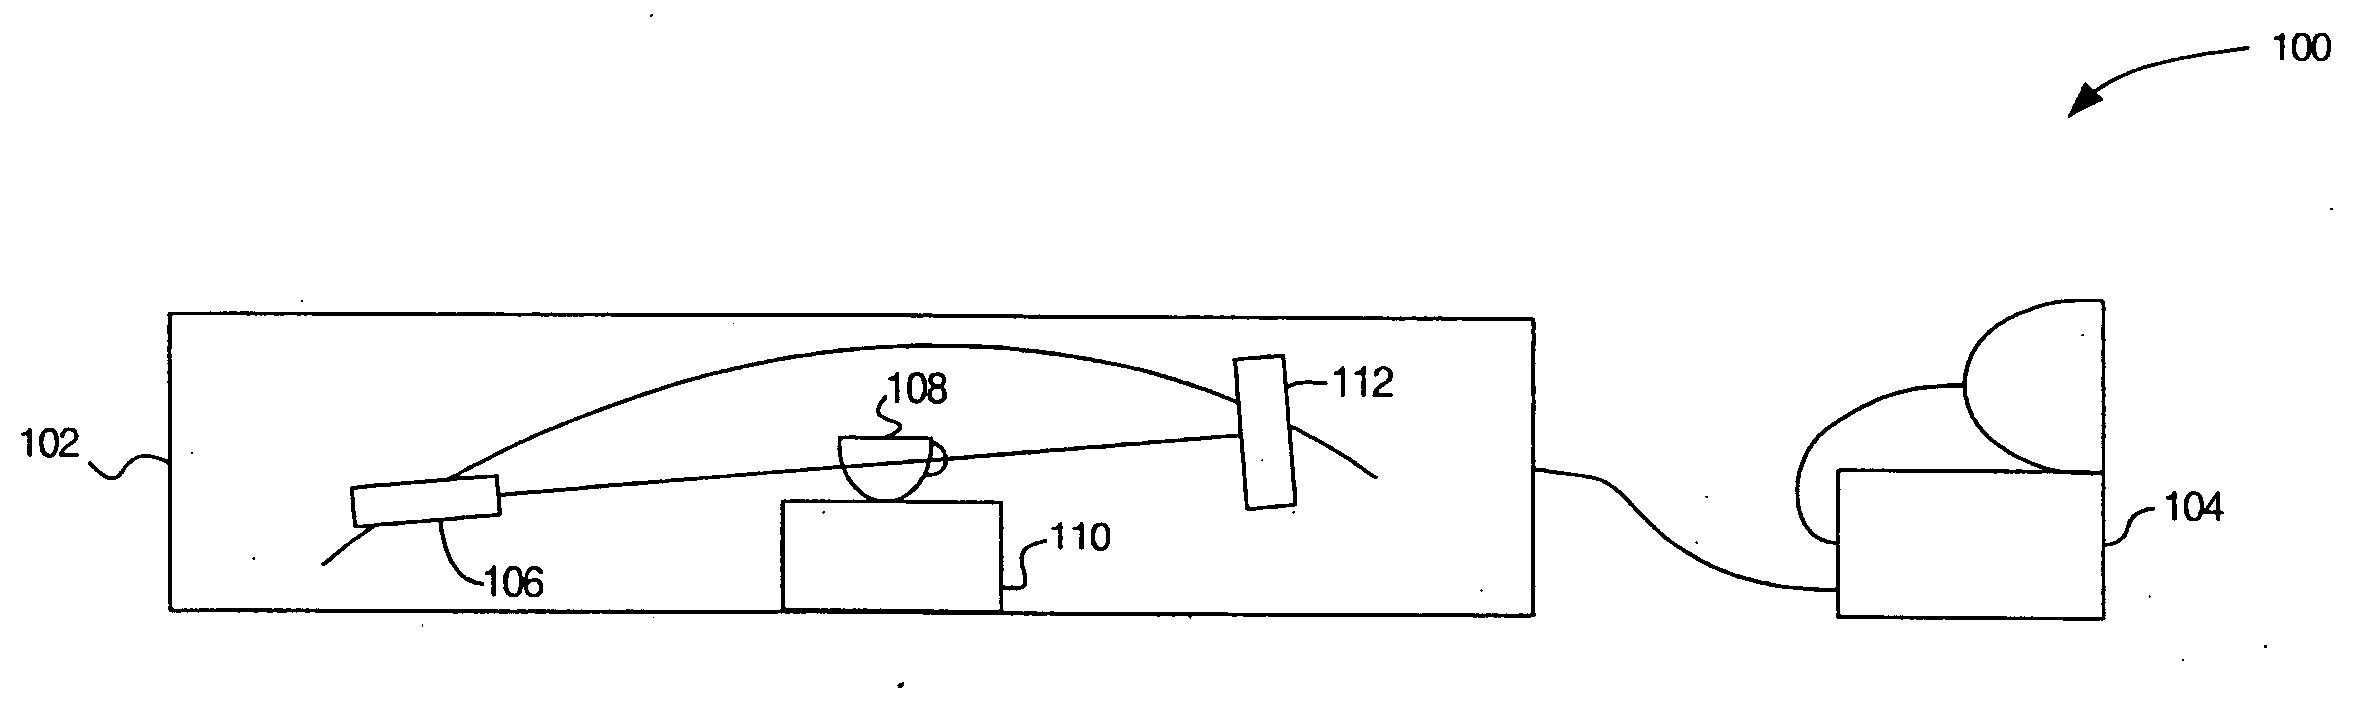 Method and apparatus for automated tomography inspection